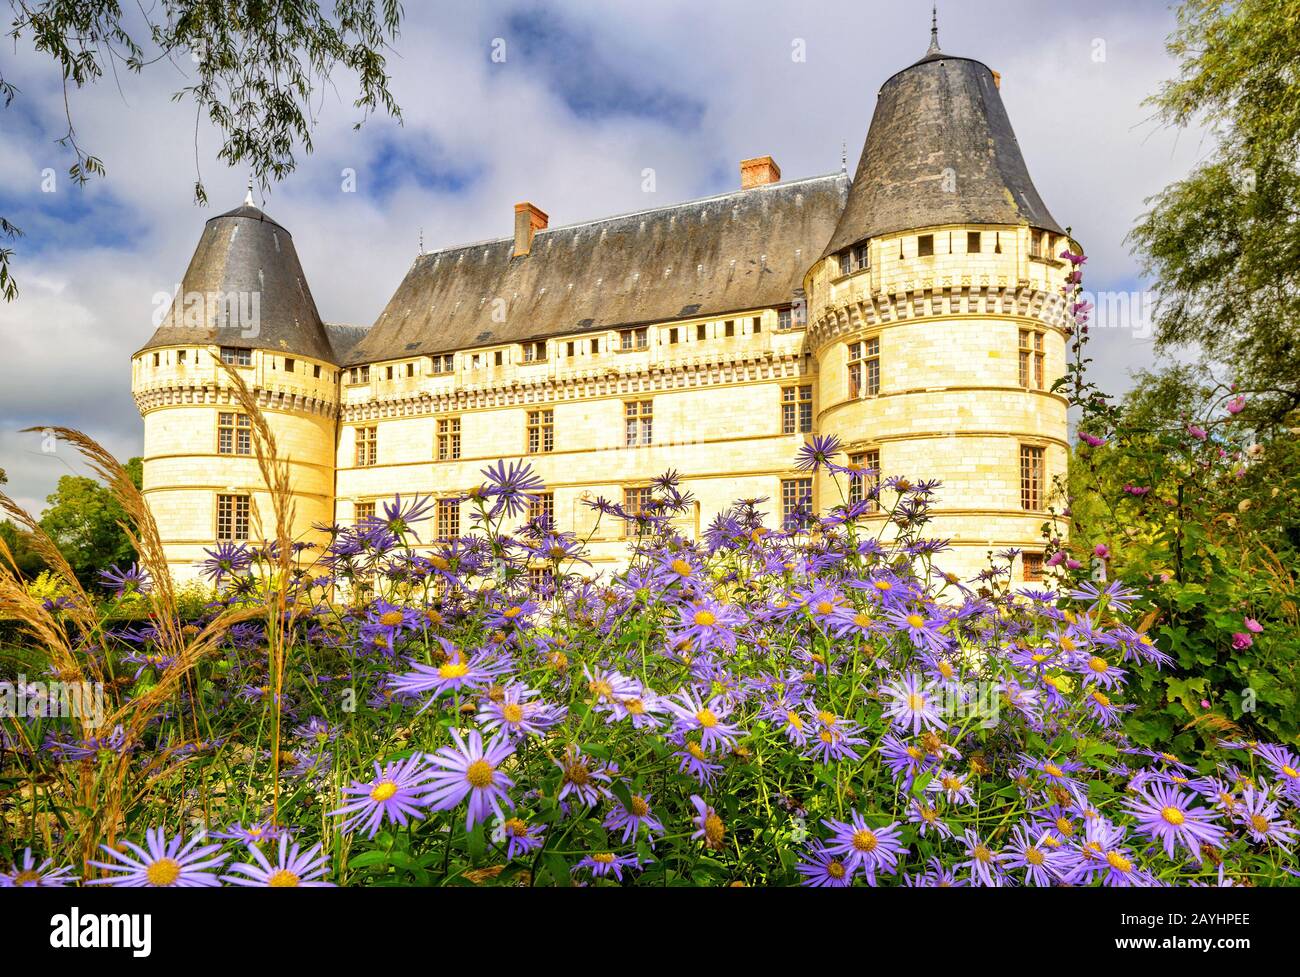 Flower garden in front of the chateau de l'Islette, France. This Renaissance castle is located in the Loire Valley, was built in the 16th century and Stock Photo